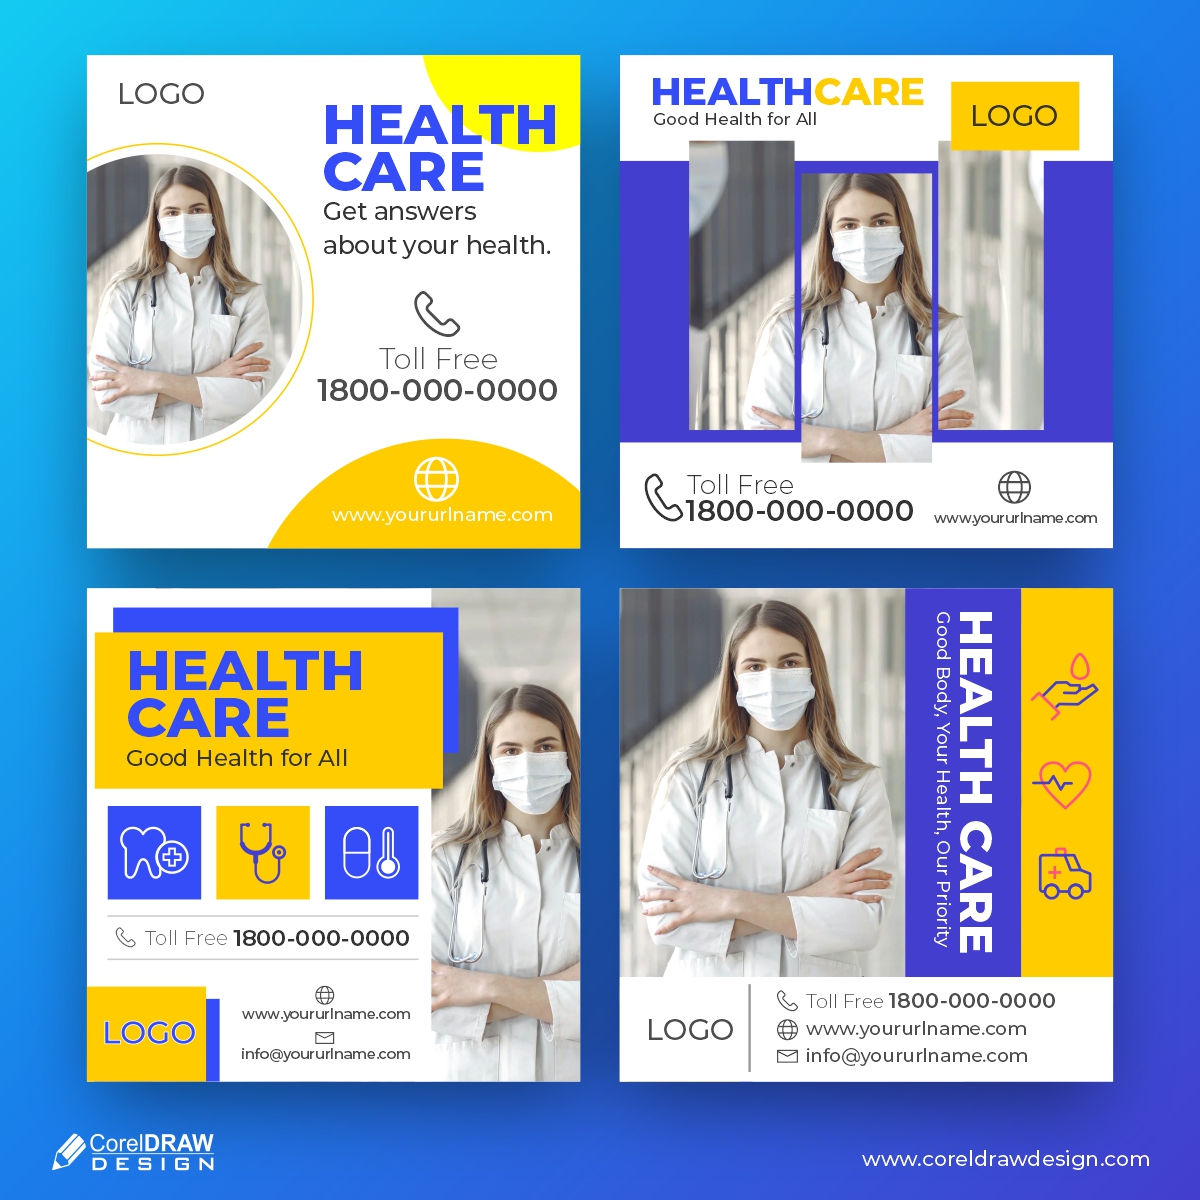 Download Download Health Care Medical Social Media Banner Template Collection Coreldraw Design Download Free Cdr Vector Stock Images Tutorials Tips Tricks